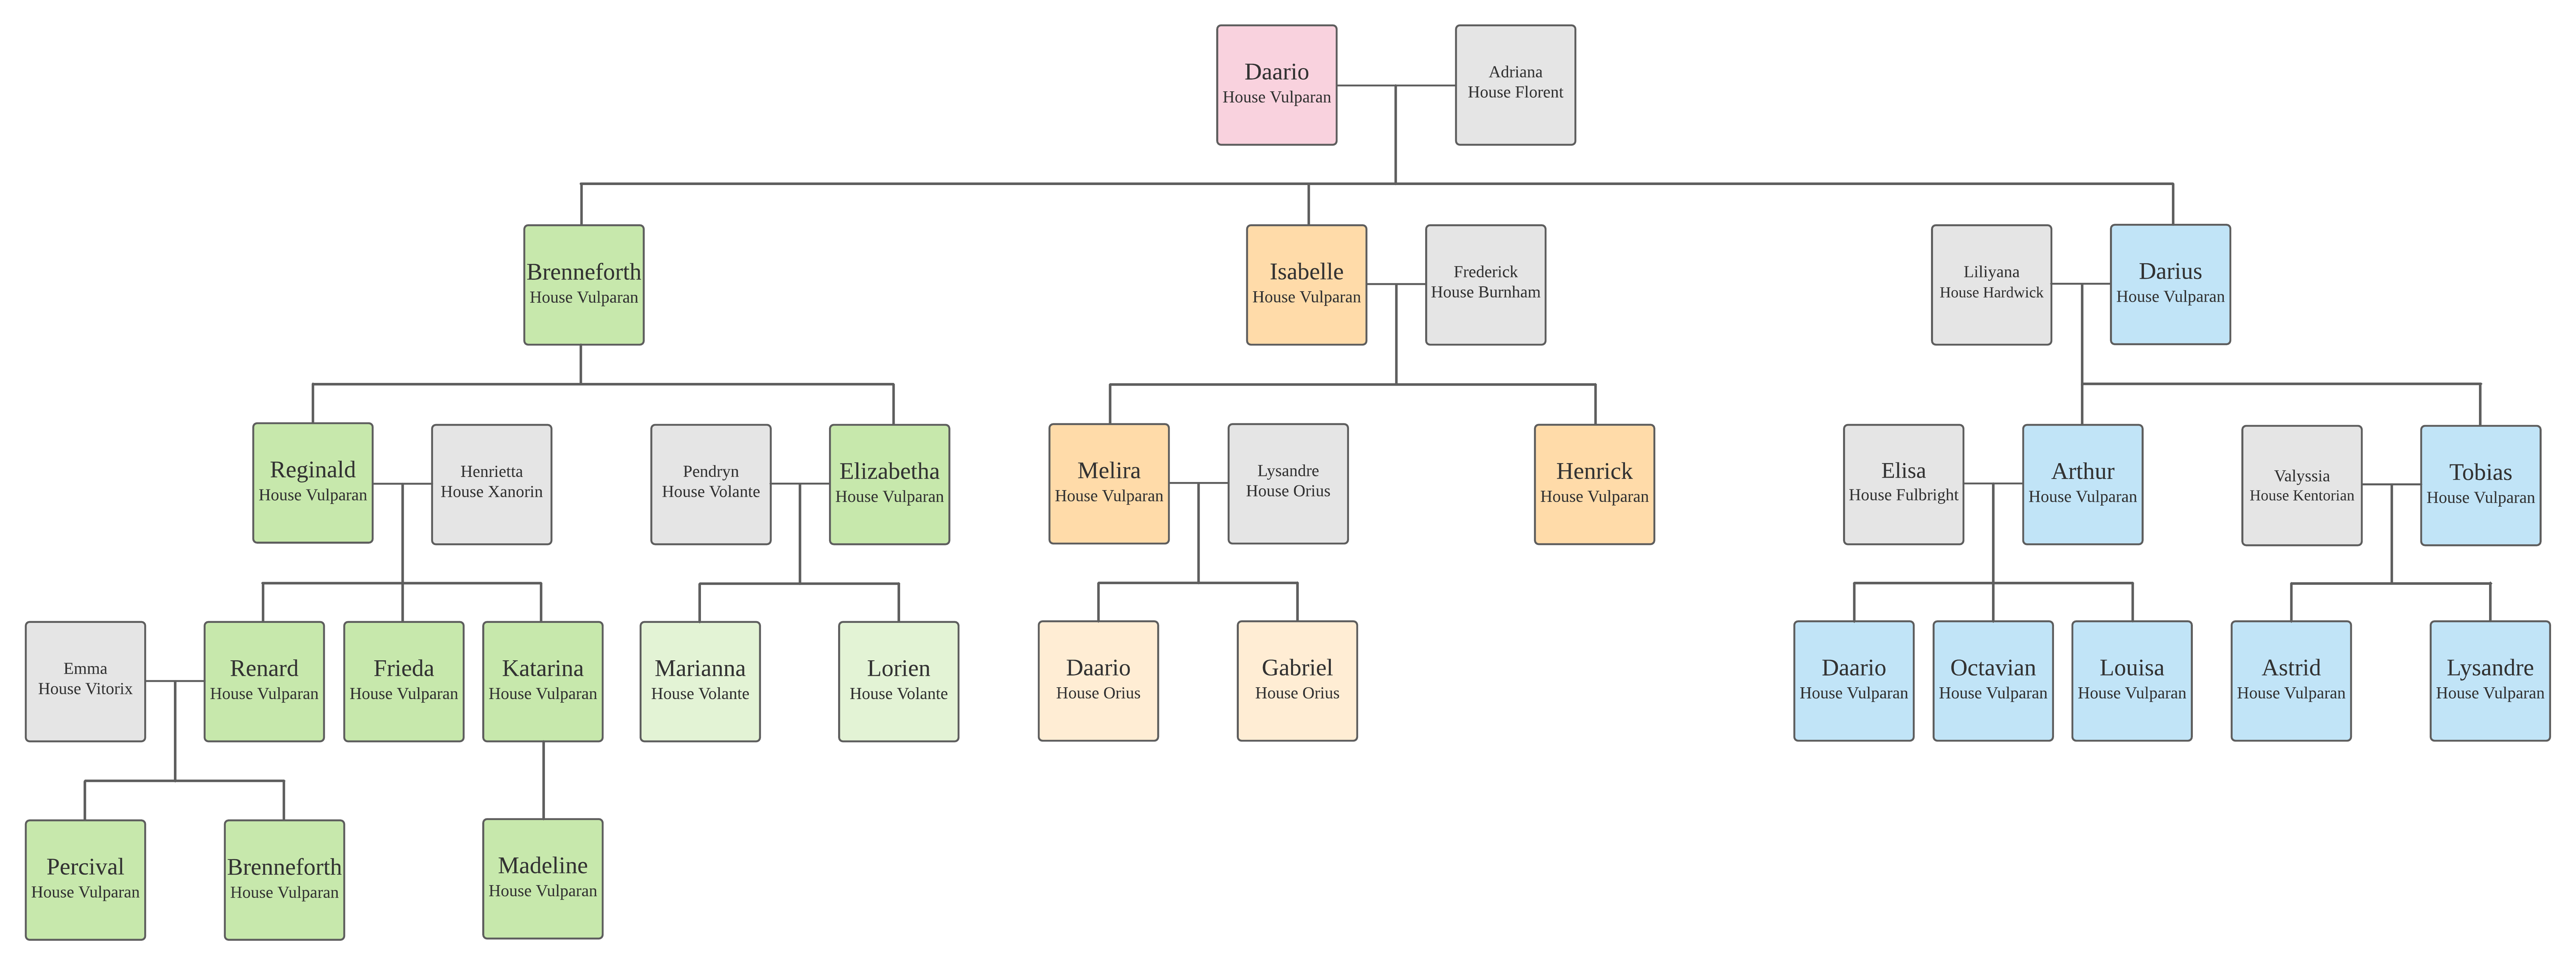 The Family Tree of House Vulparan, from Daario 'the Wise' of House Vulparan